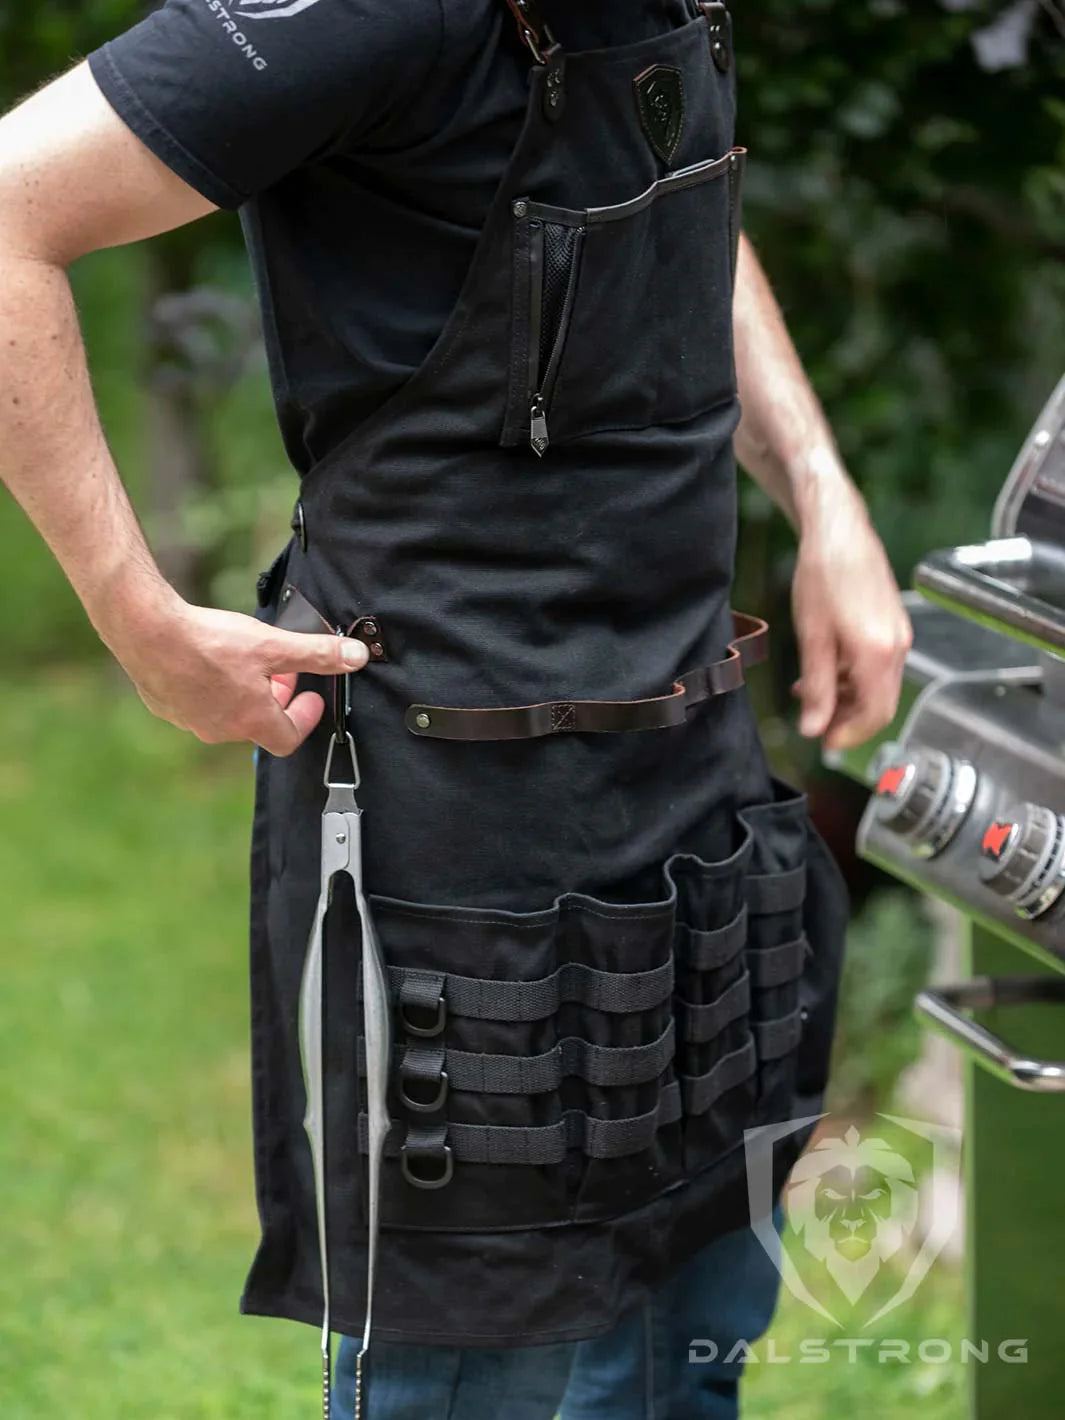 Adjustable Work Apron with Tool Pocket Waterproof for Sculpting